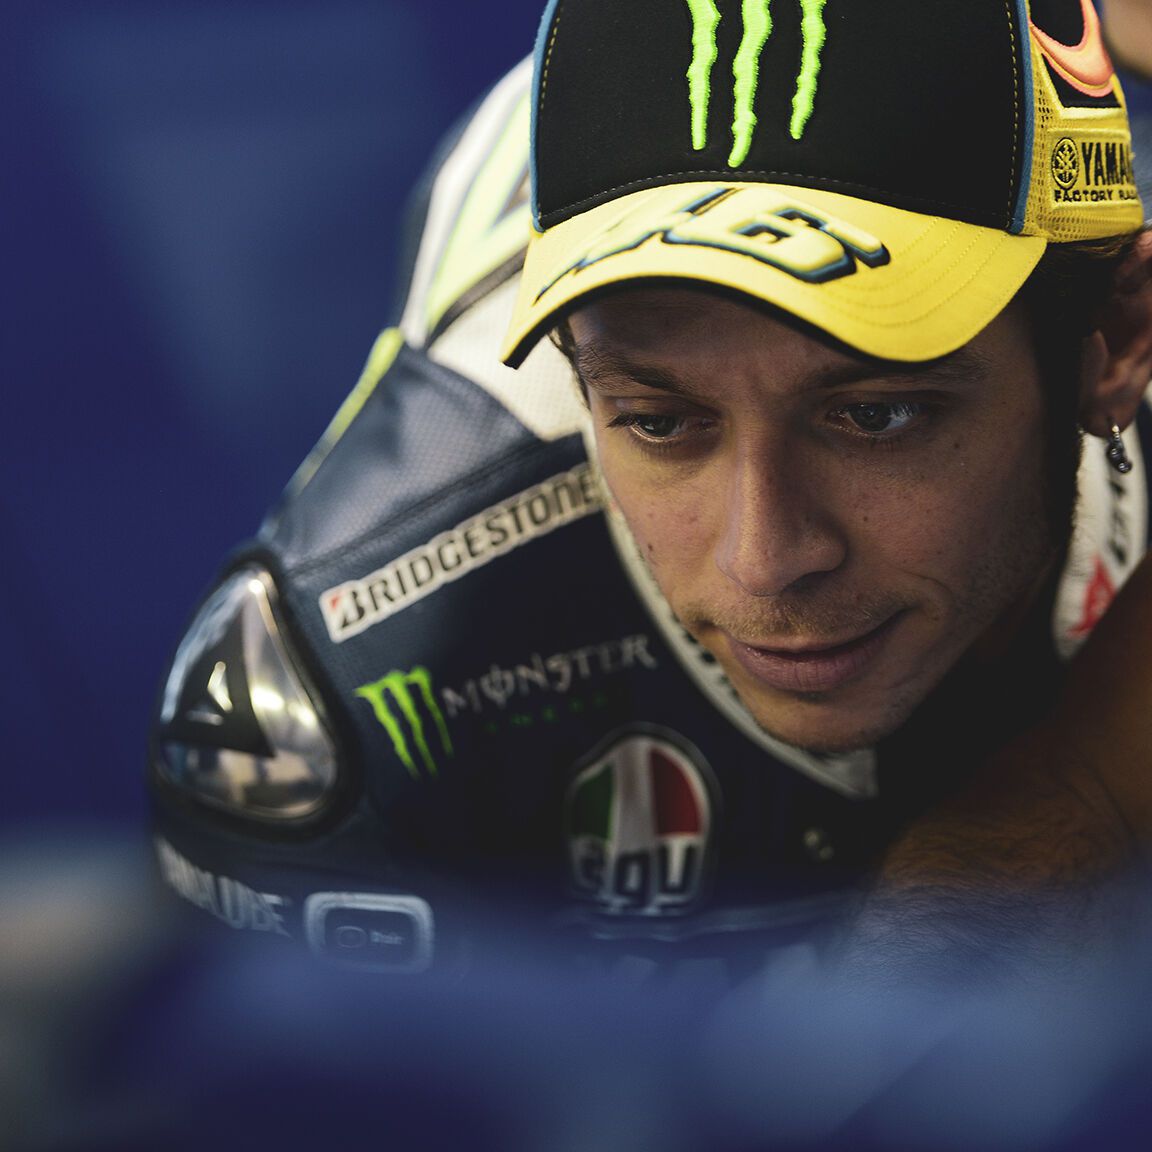 Valentino Rossi has always been a fan favourite. Dainese photo